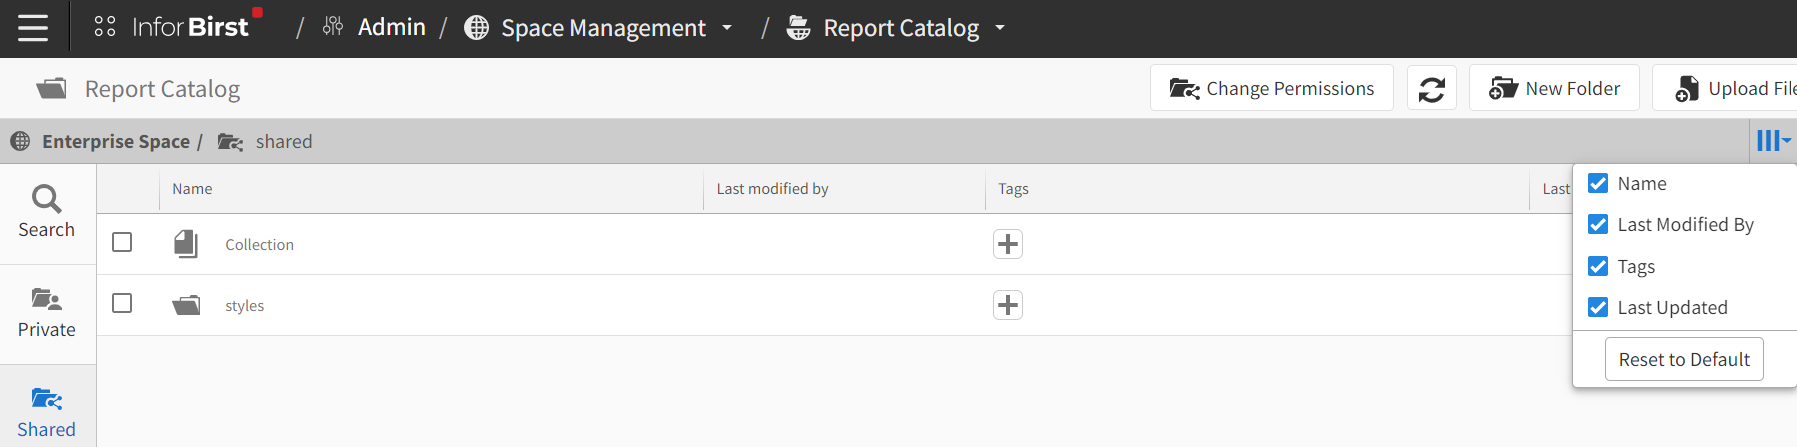 Screen capture of Report Catalog page with the Columns icon